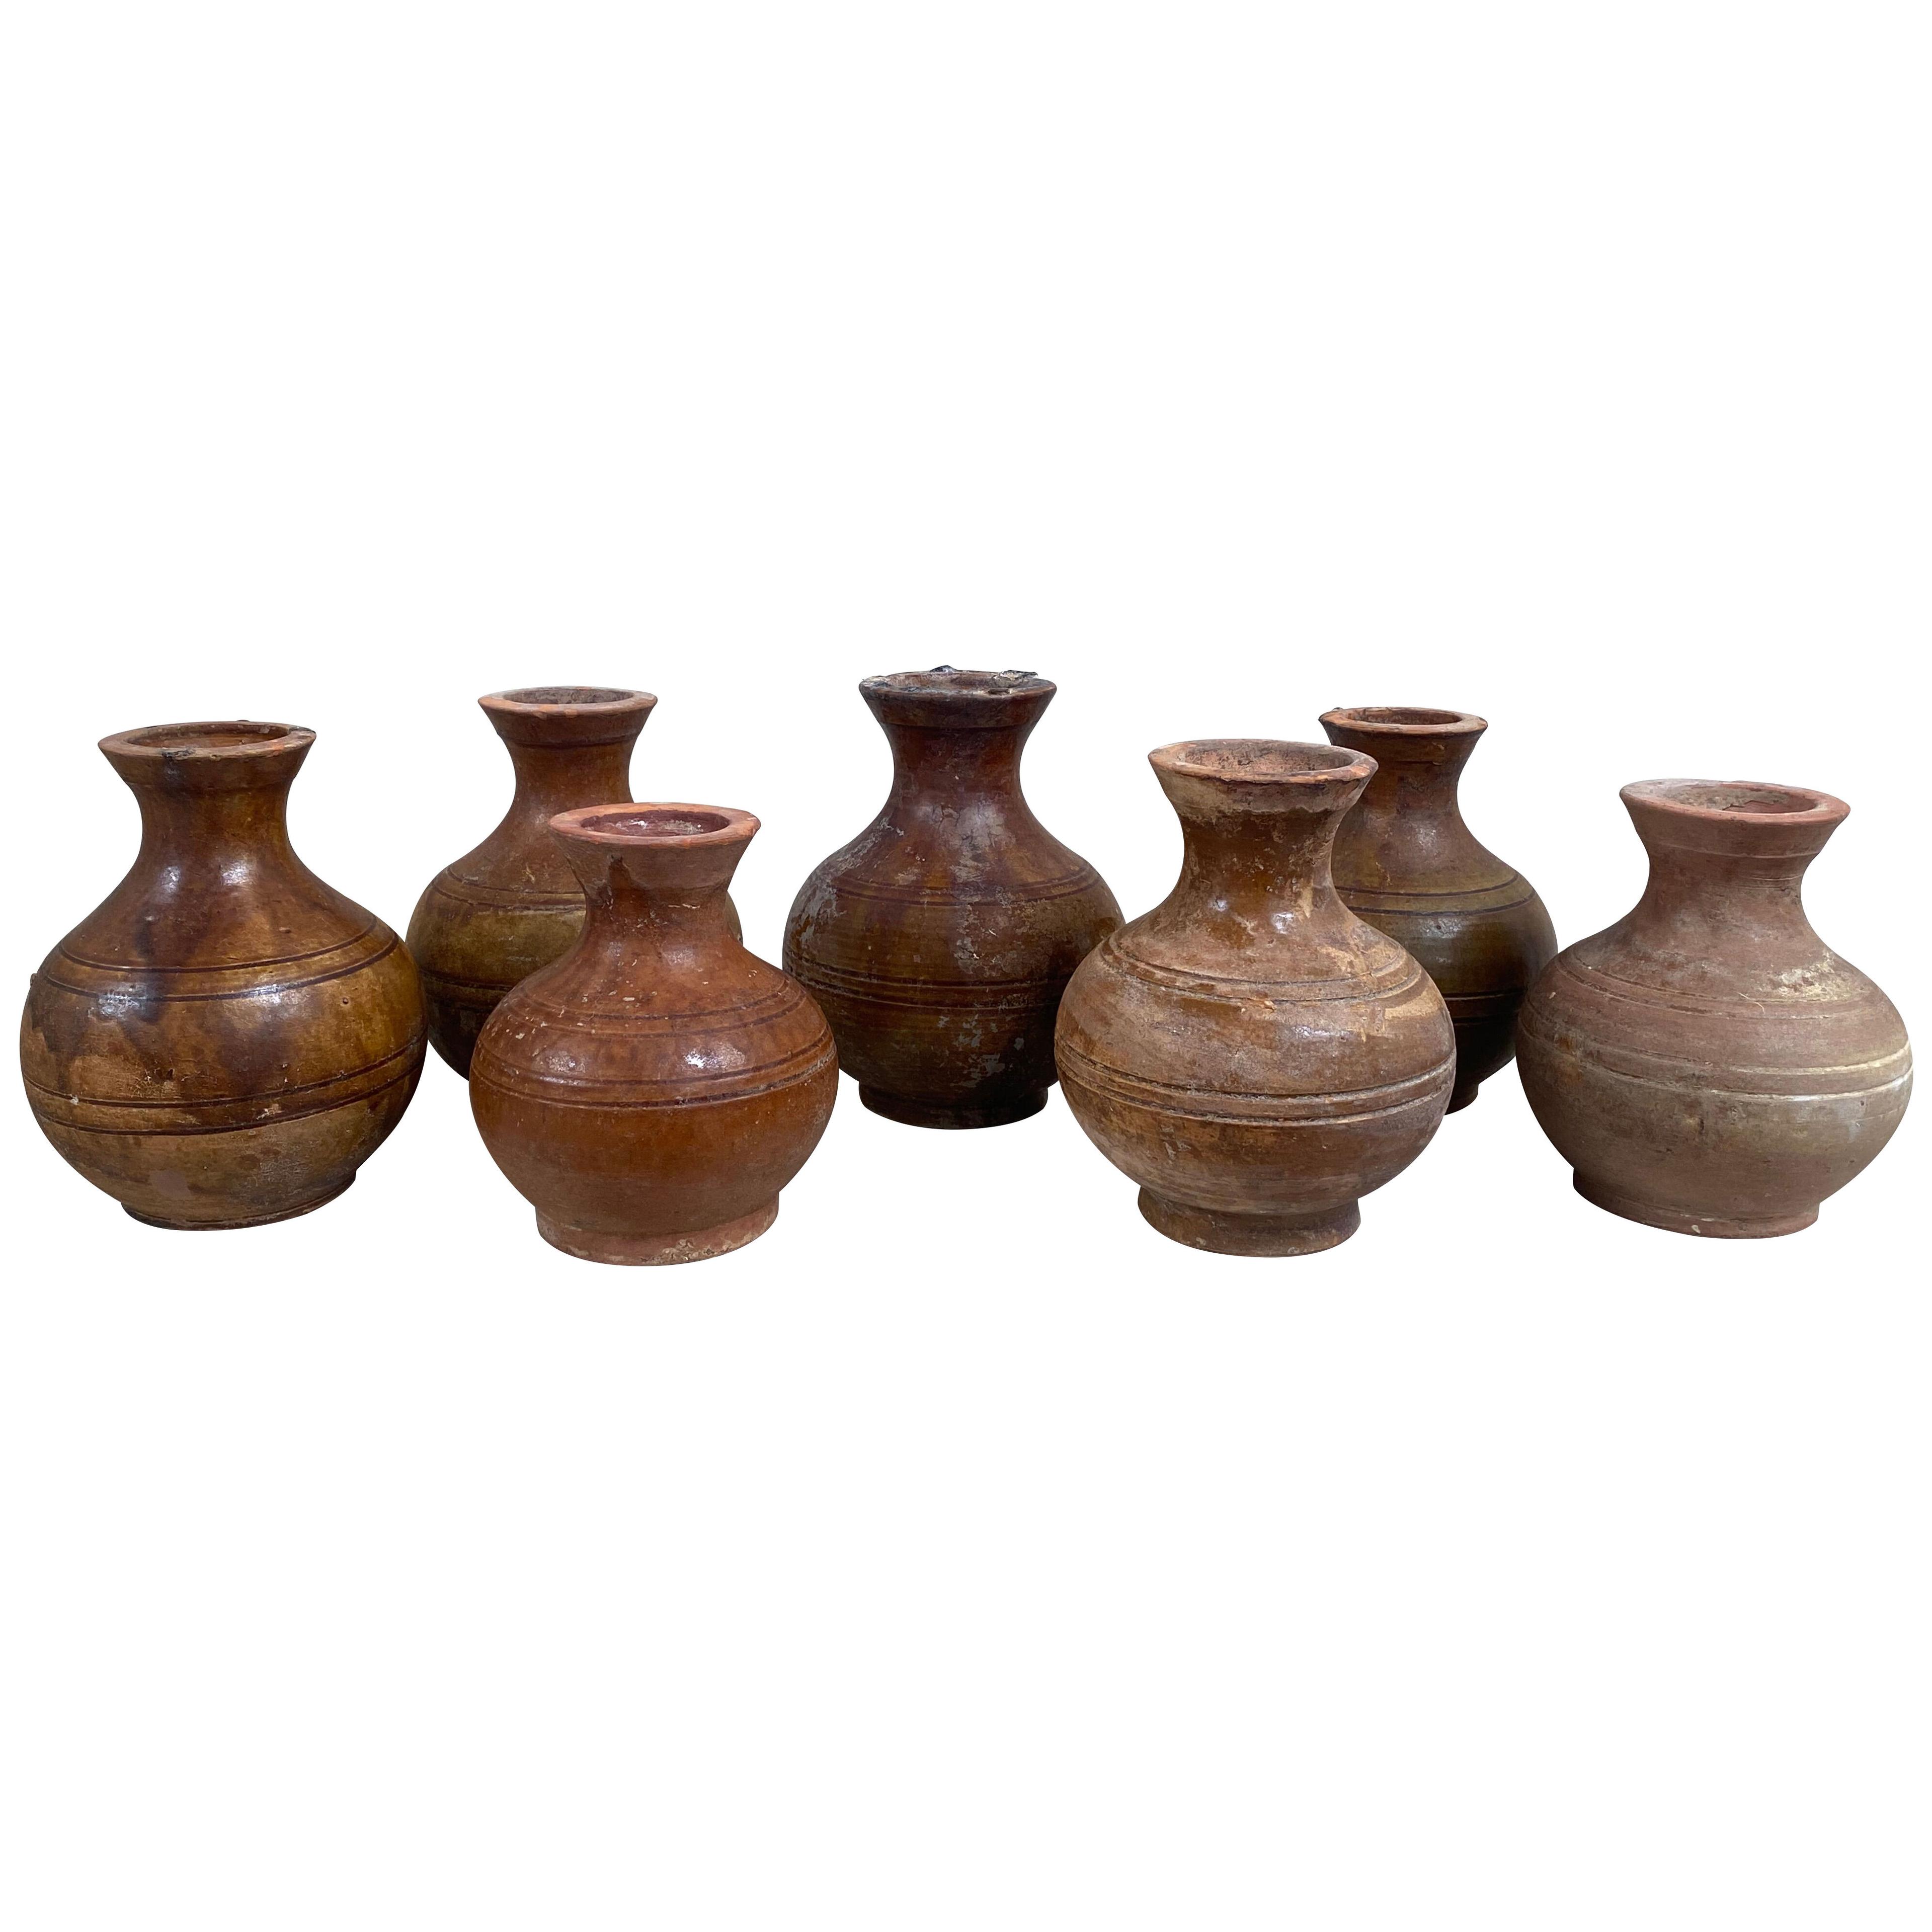 Set of 7 Chinese Brown Terracotta Vases